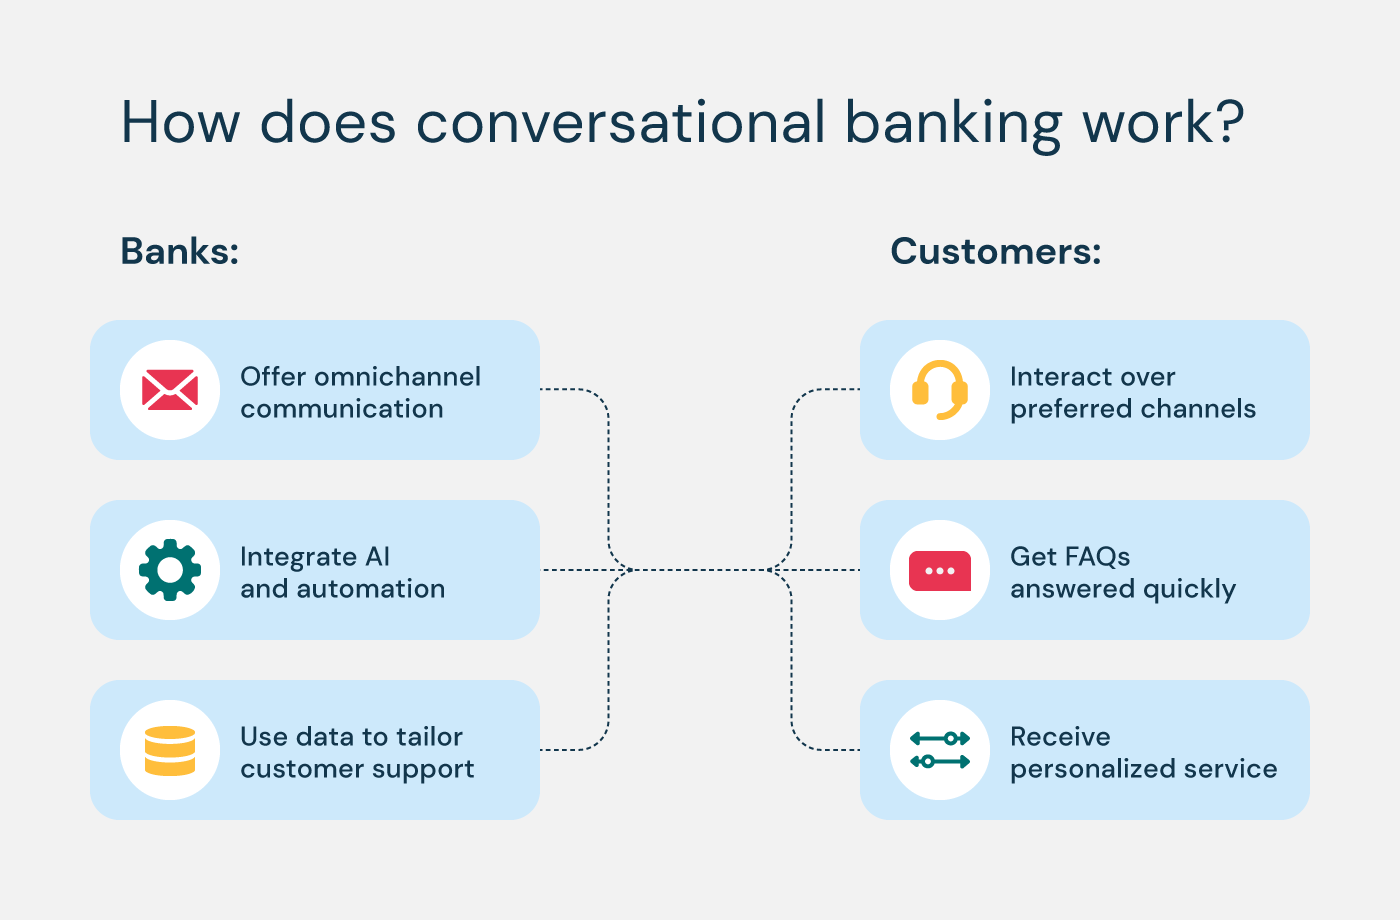 How does conversational banking work